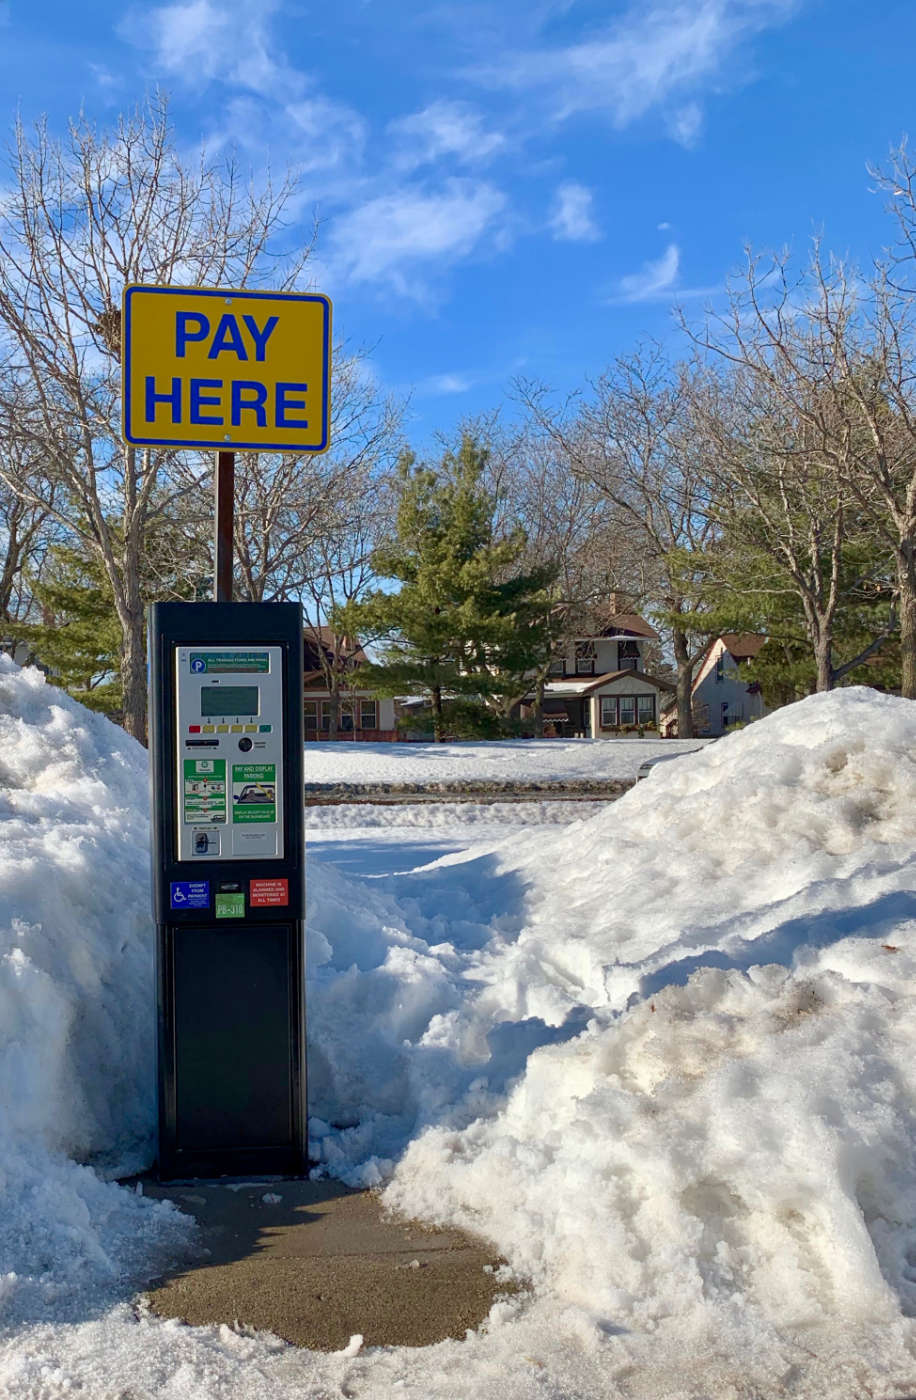 parking meter station with big Pay Here sign on top surrounded by mounds of snow on a sunny day